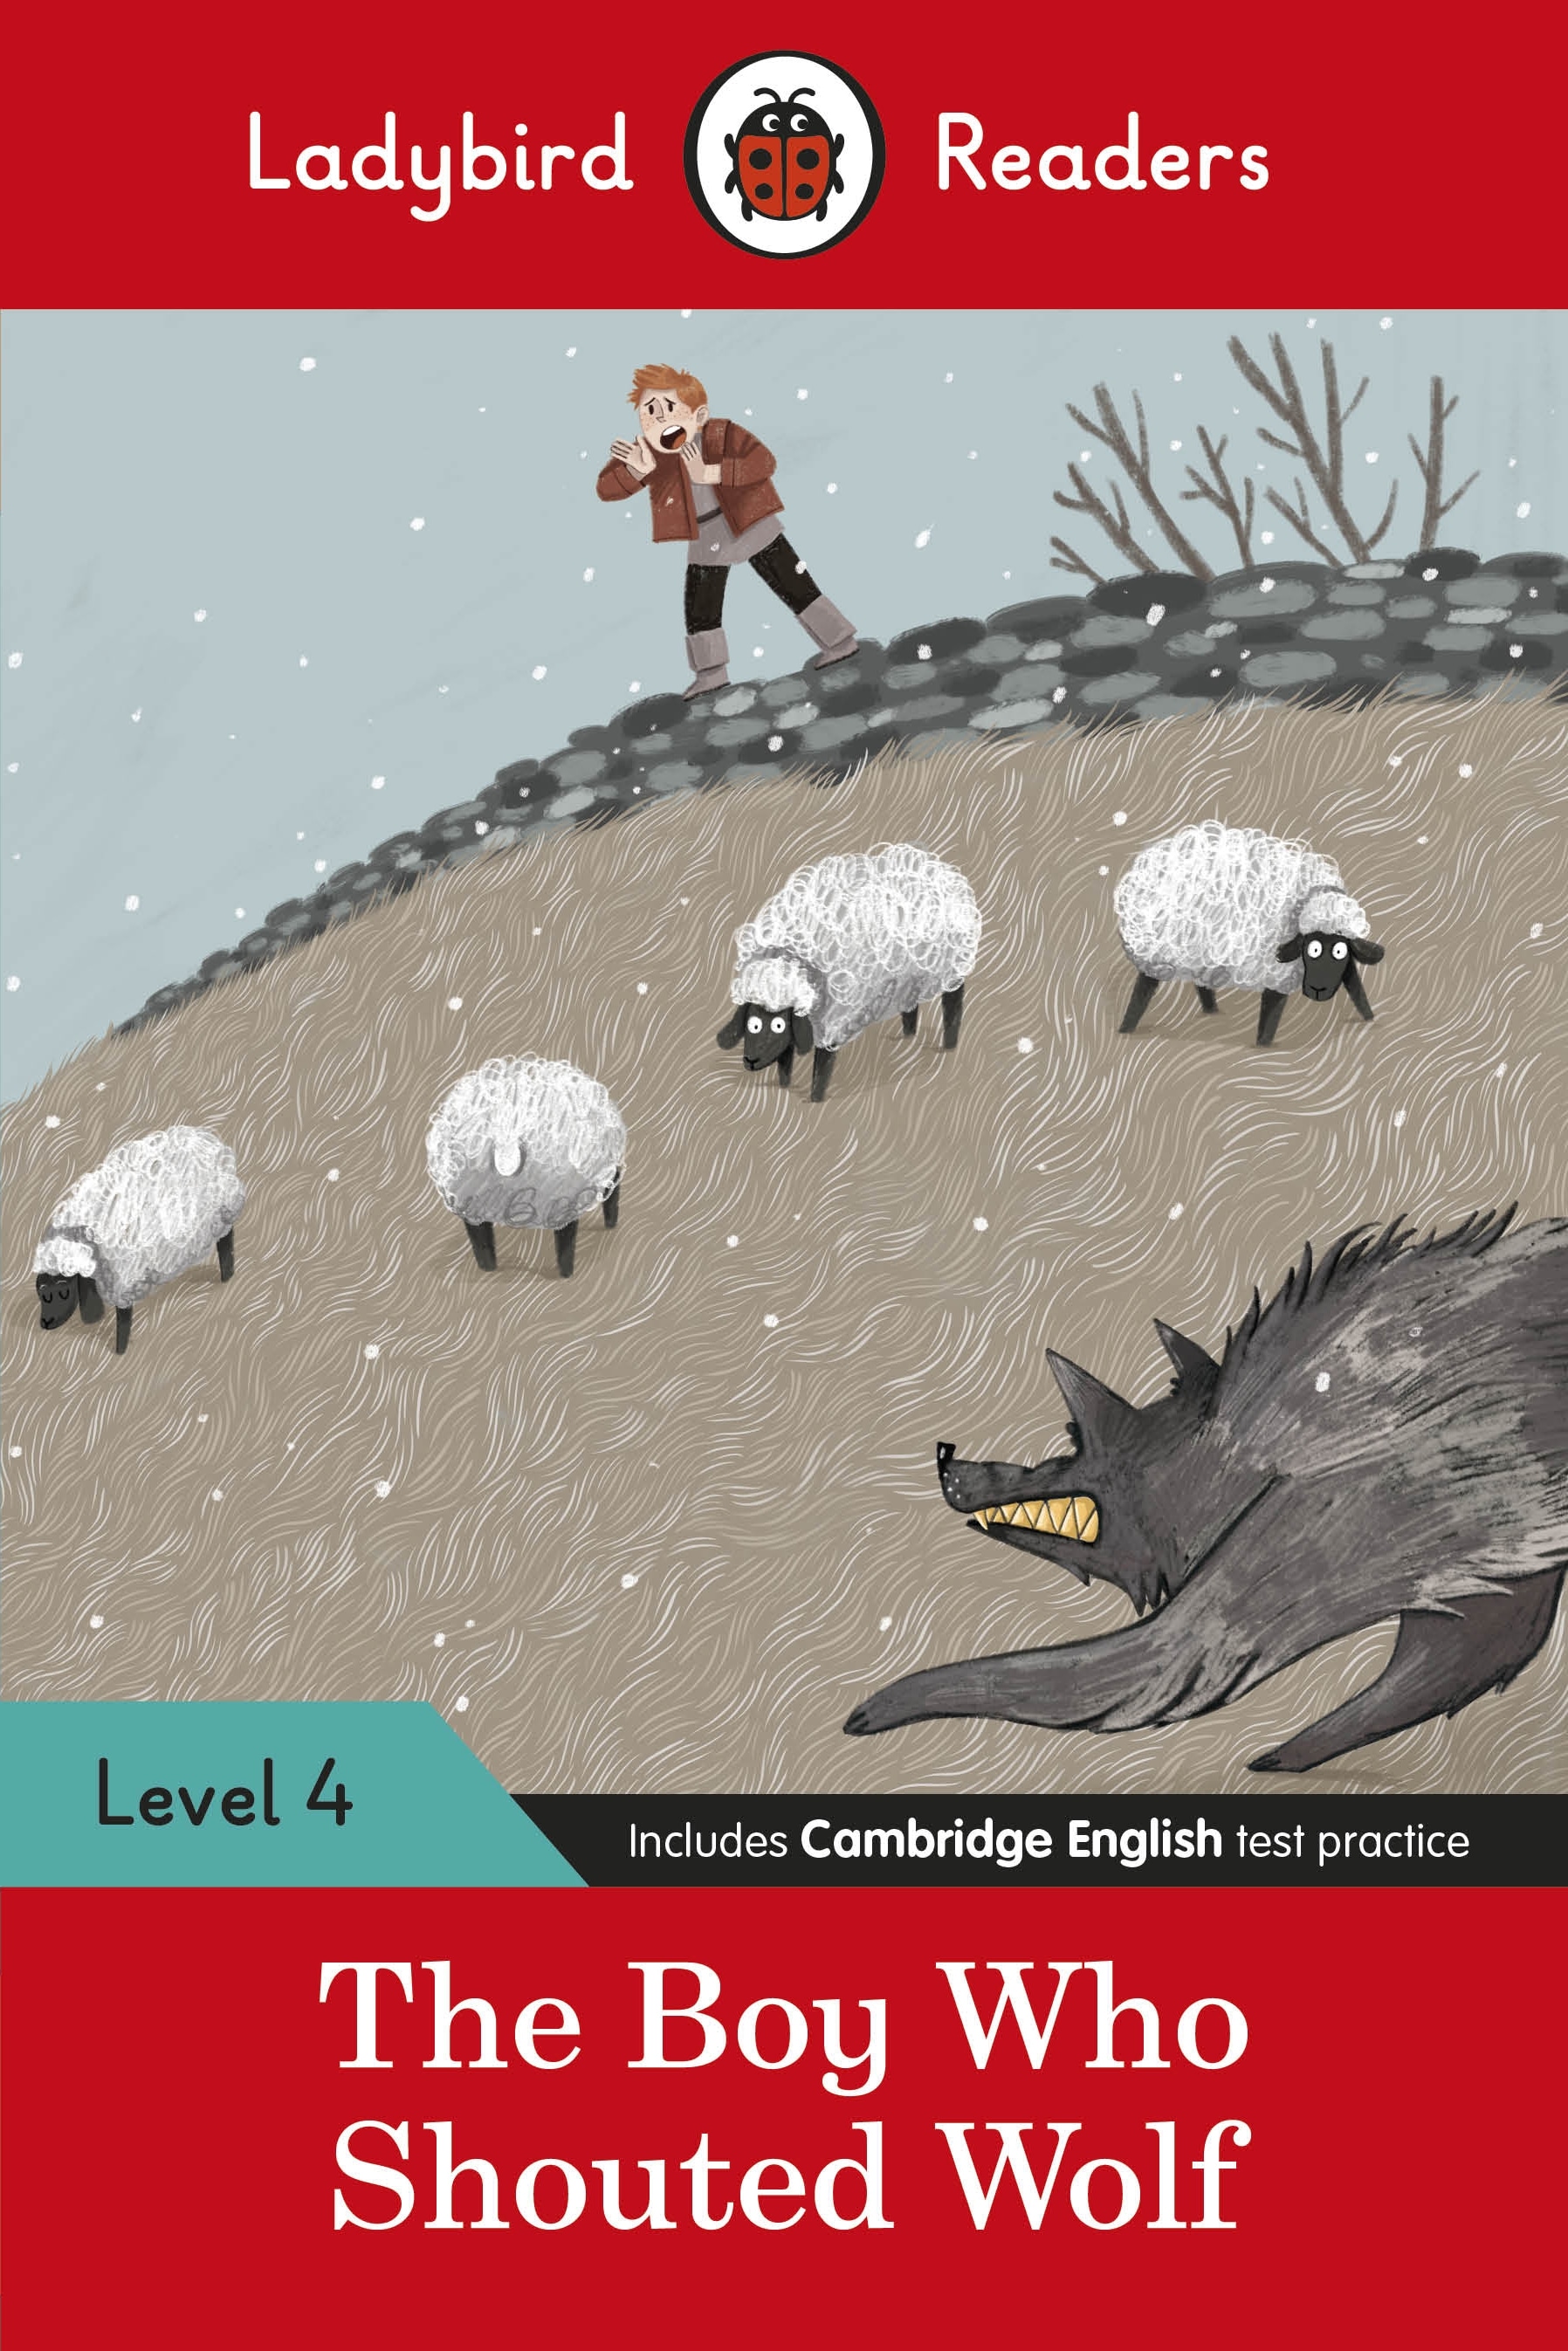 Ladybird Readers Level 4 - The Boy Who Shouted Wolf (ELT Graded Reader)